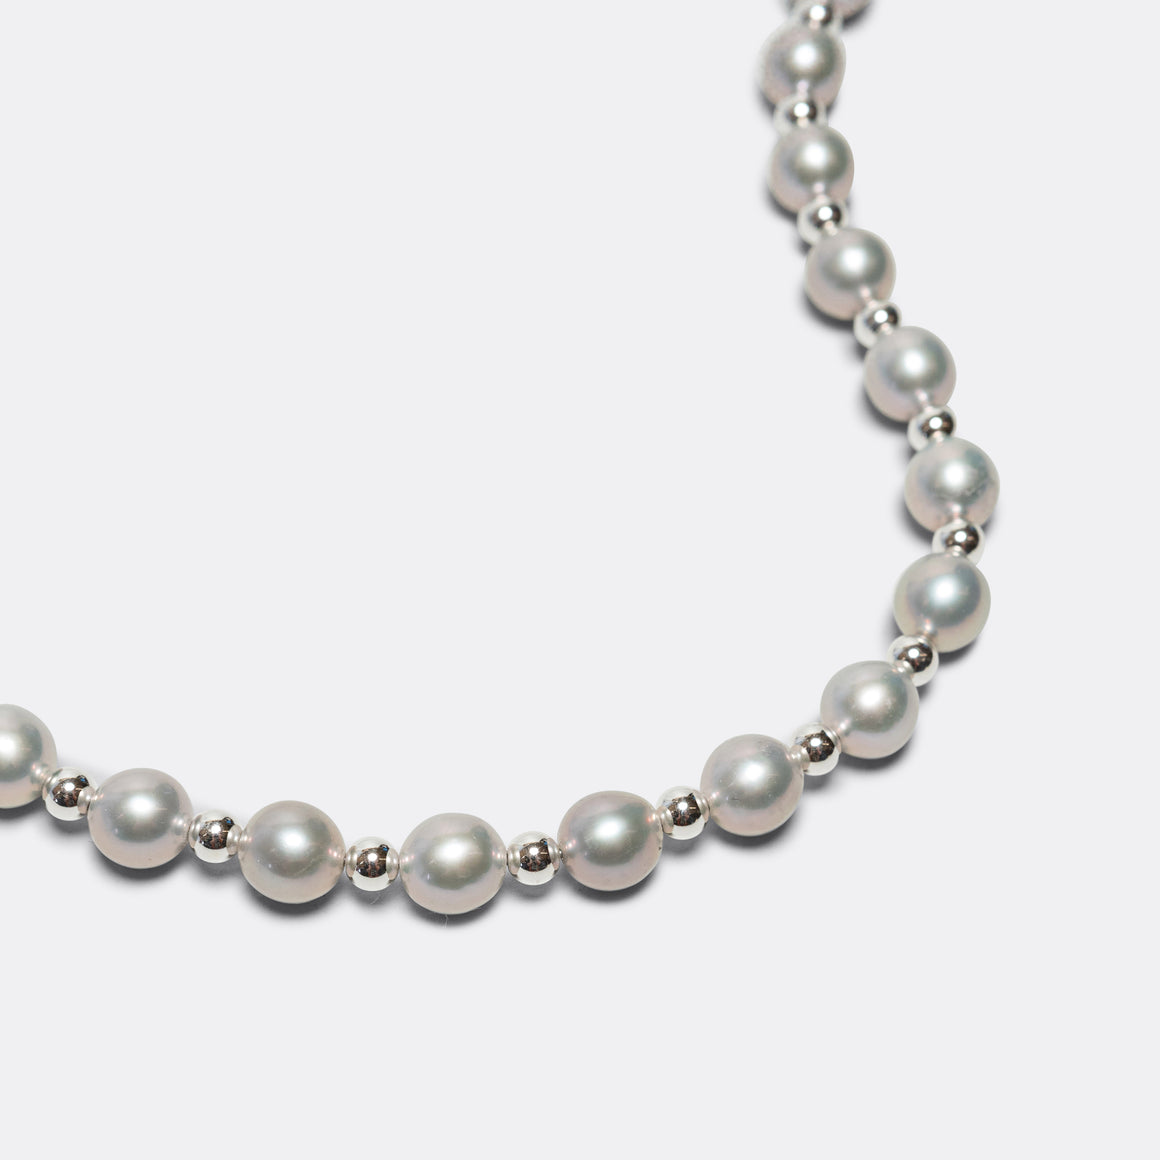 Polite Worldwide - PPF Pearl Necklace - Silver Shine - UP THERE